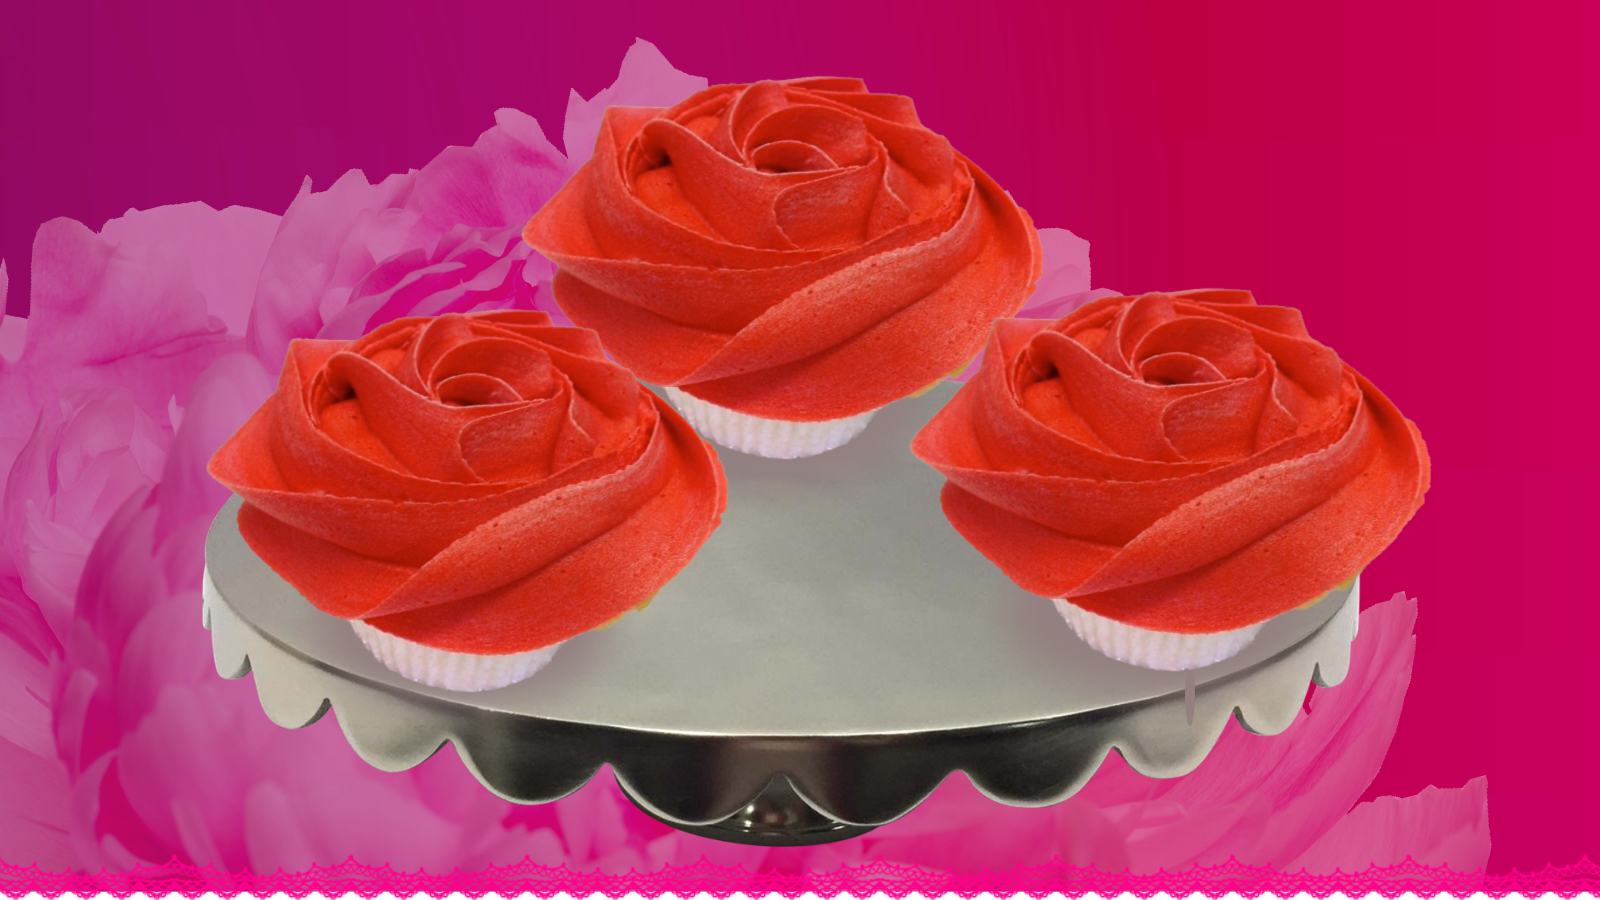 Cupcakes Silver Platter.png